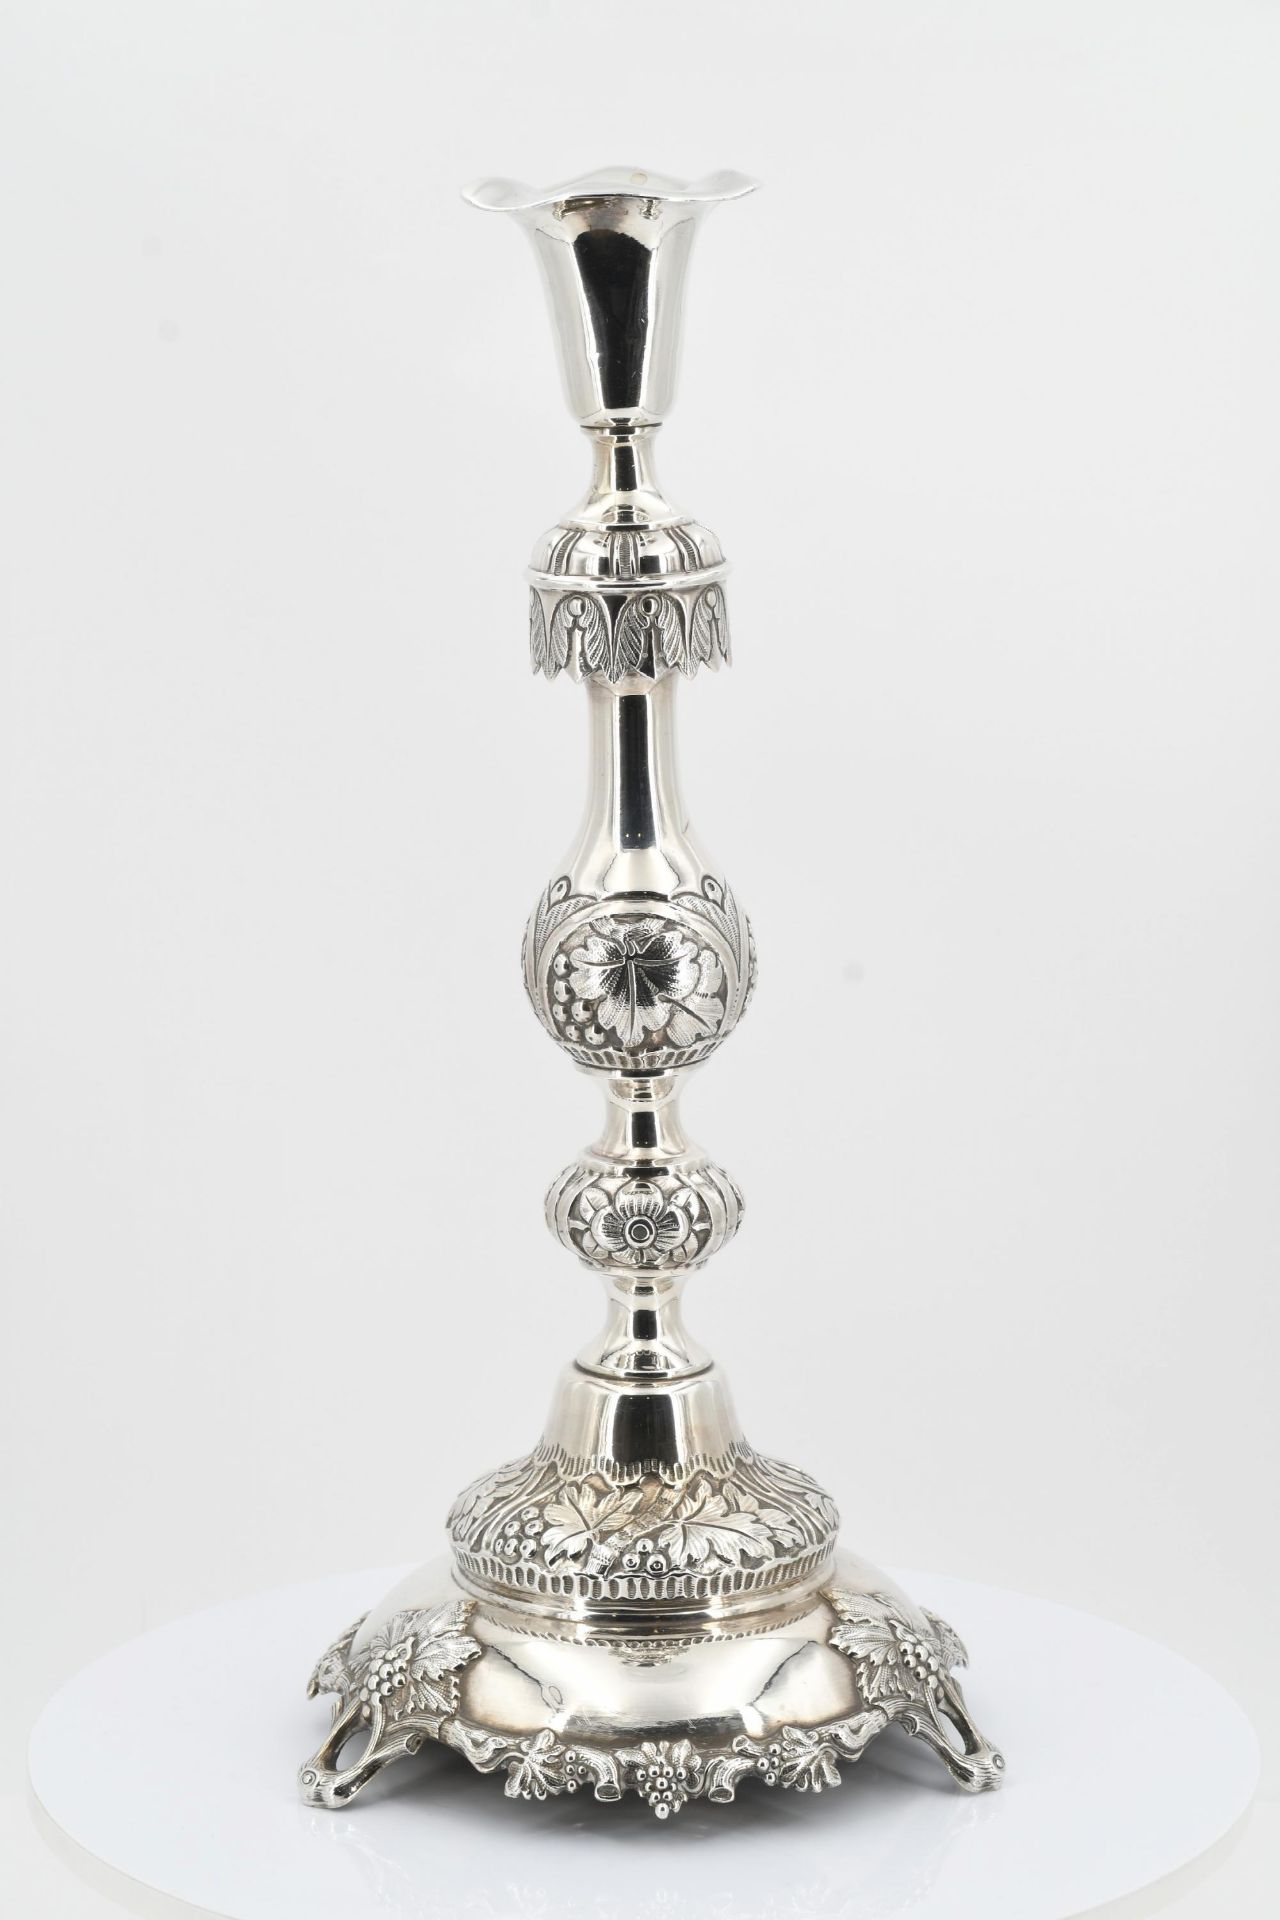 Pair of candlesticks with grape and vine décor - Image 2 of 11